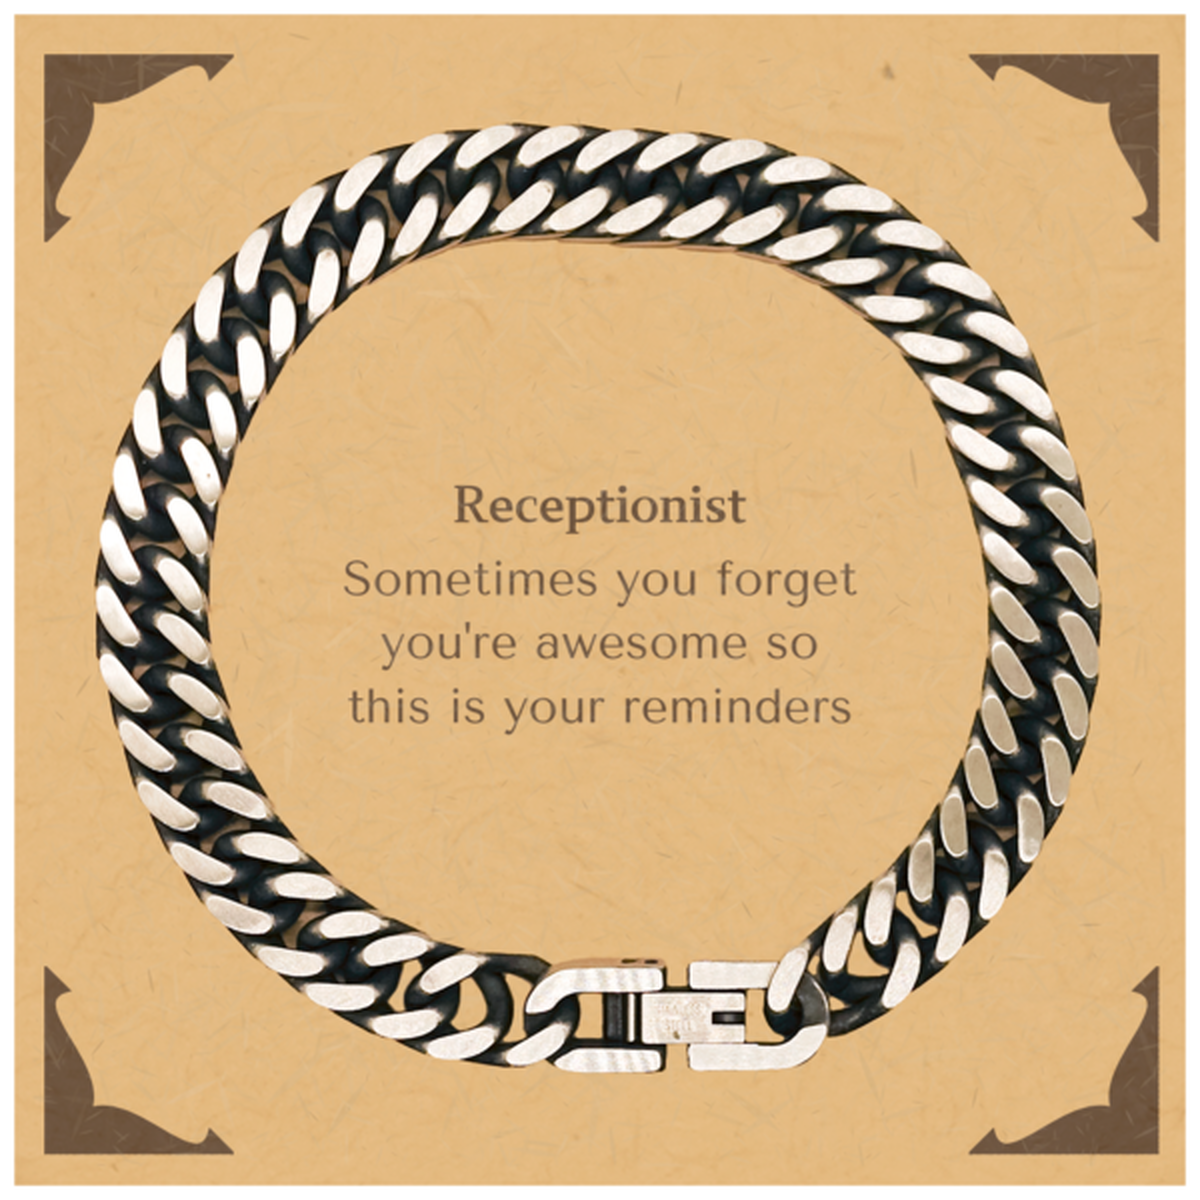 Sentimental Receptionist Cuban Link Chain Bracelet, Receptionist Sometimes you forget you're awesome so this is your reminders, Graduation Christmas Birthday Gifts for Receptionist, Men, Women, Coworkers